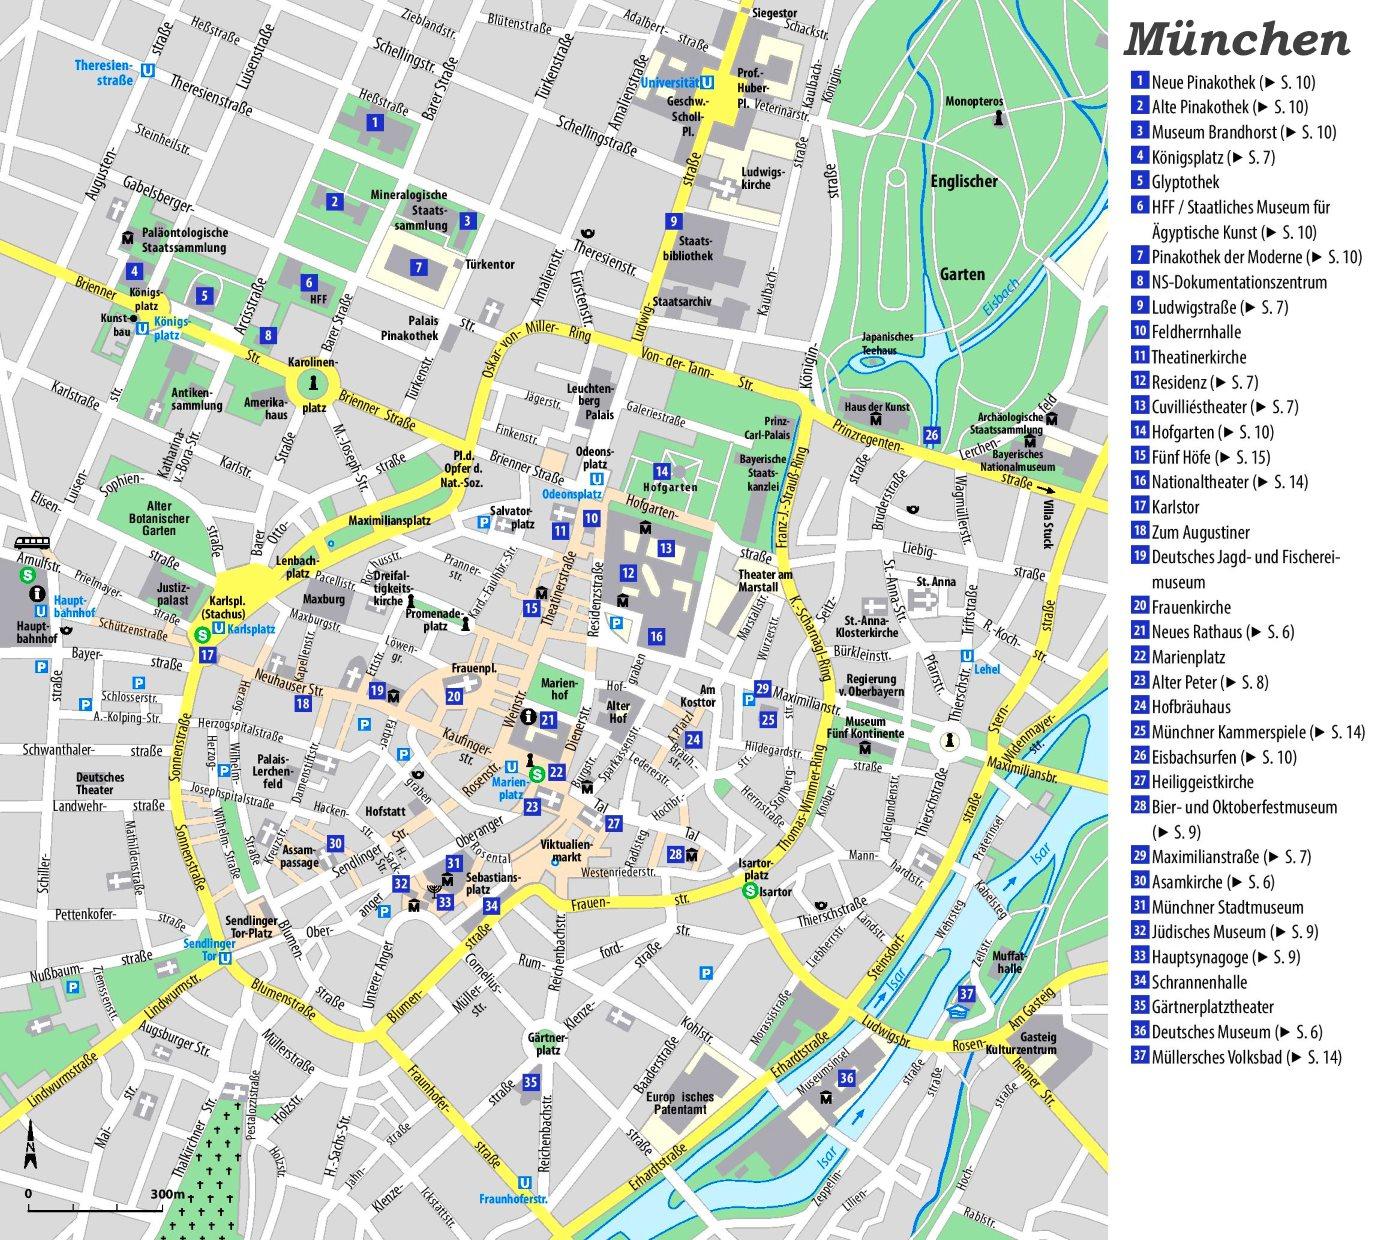 Map of Munich tourist: attractions and monuments of Munich